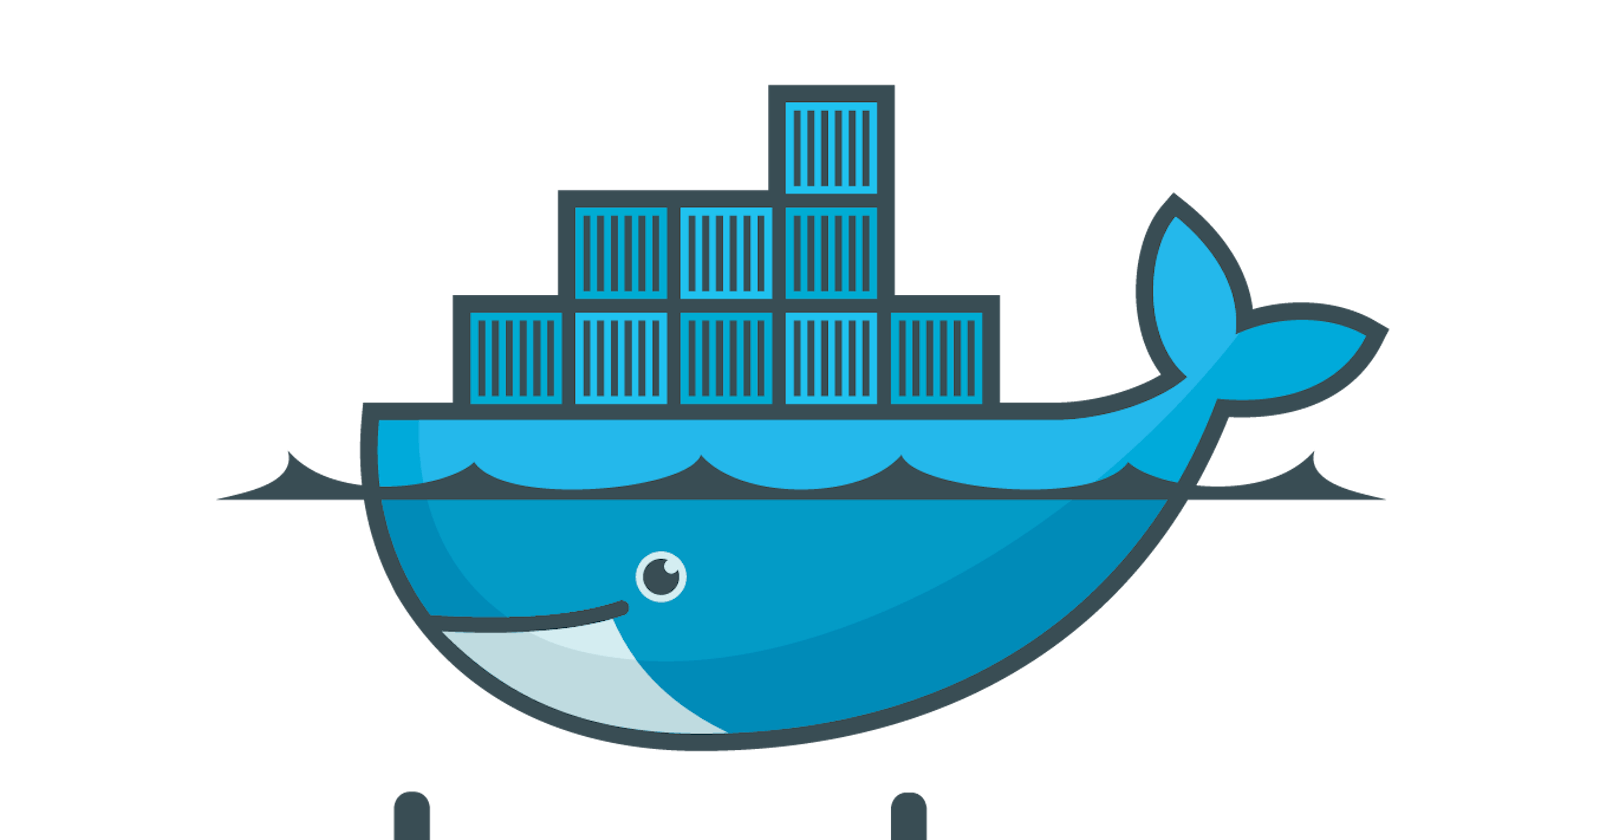 Why Should We Use Docker? Exploring the Benefits of Containerization